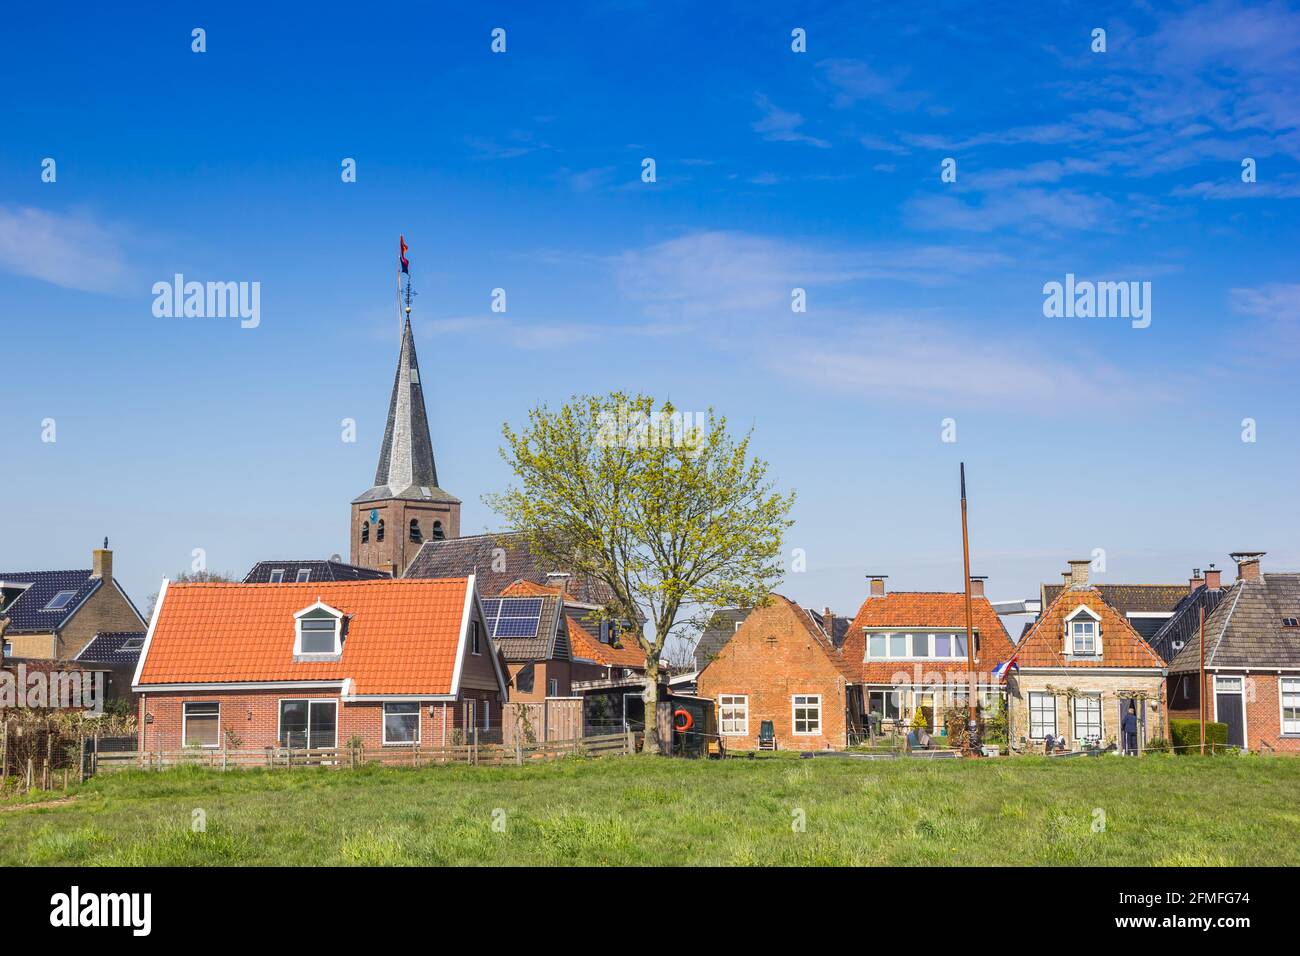 Old houses and church tower in Warten, Netherlands Stock Photo